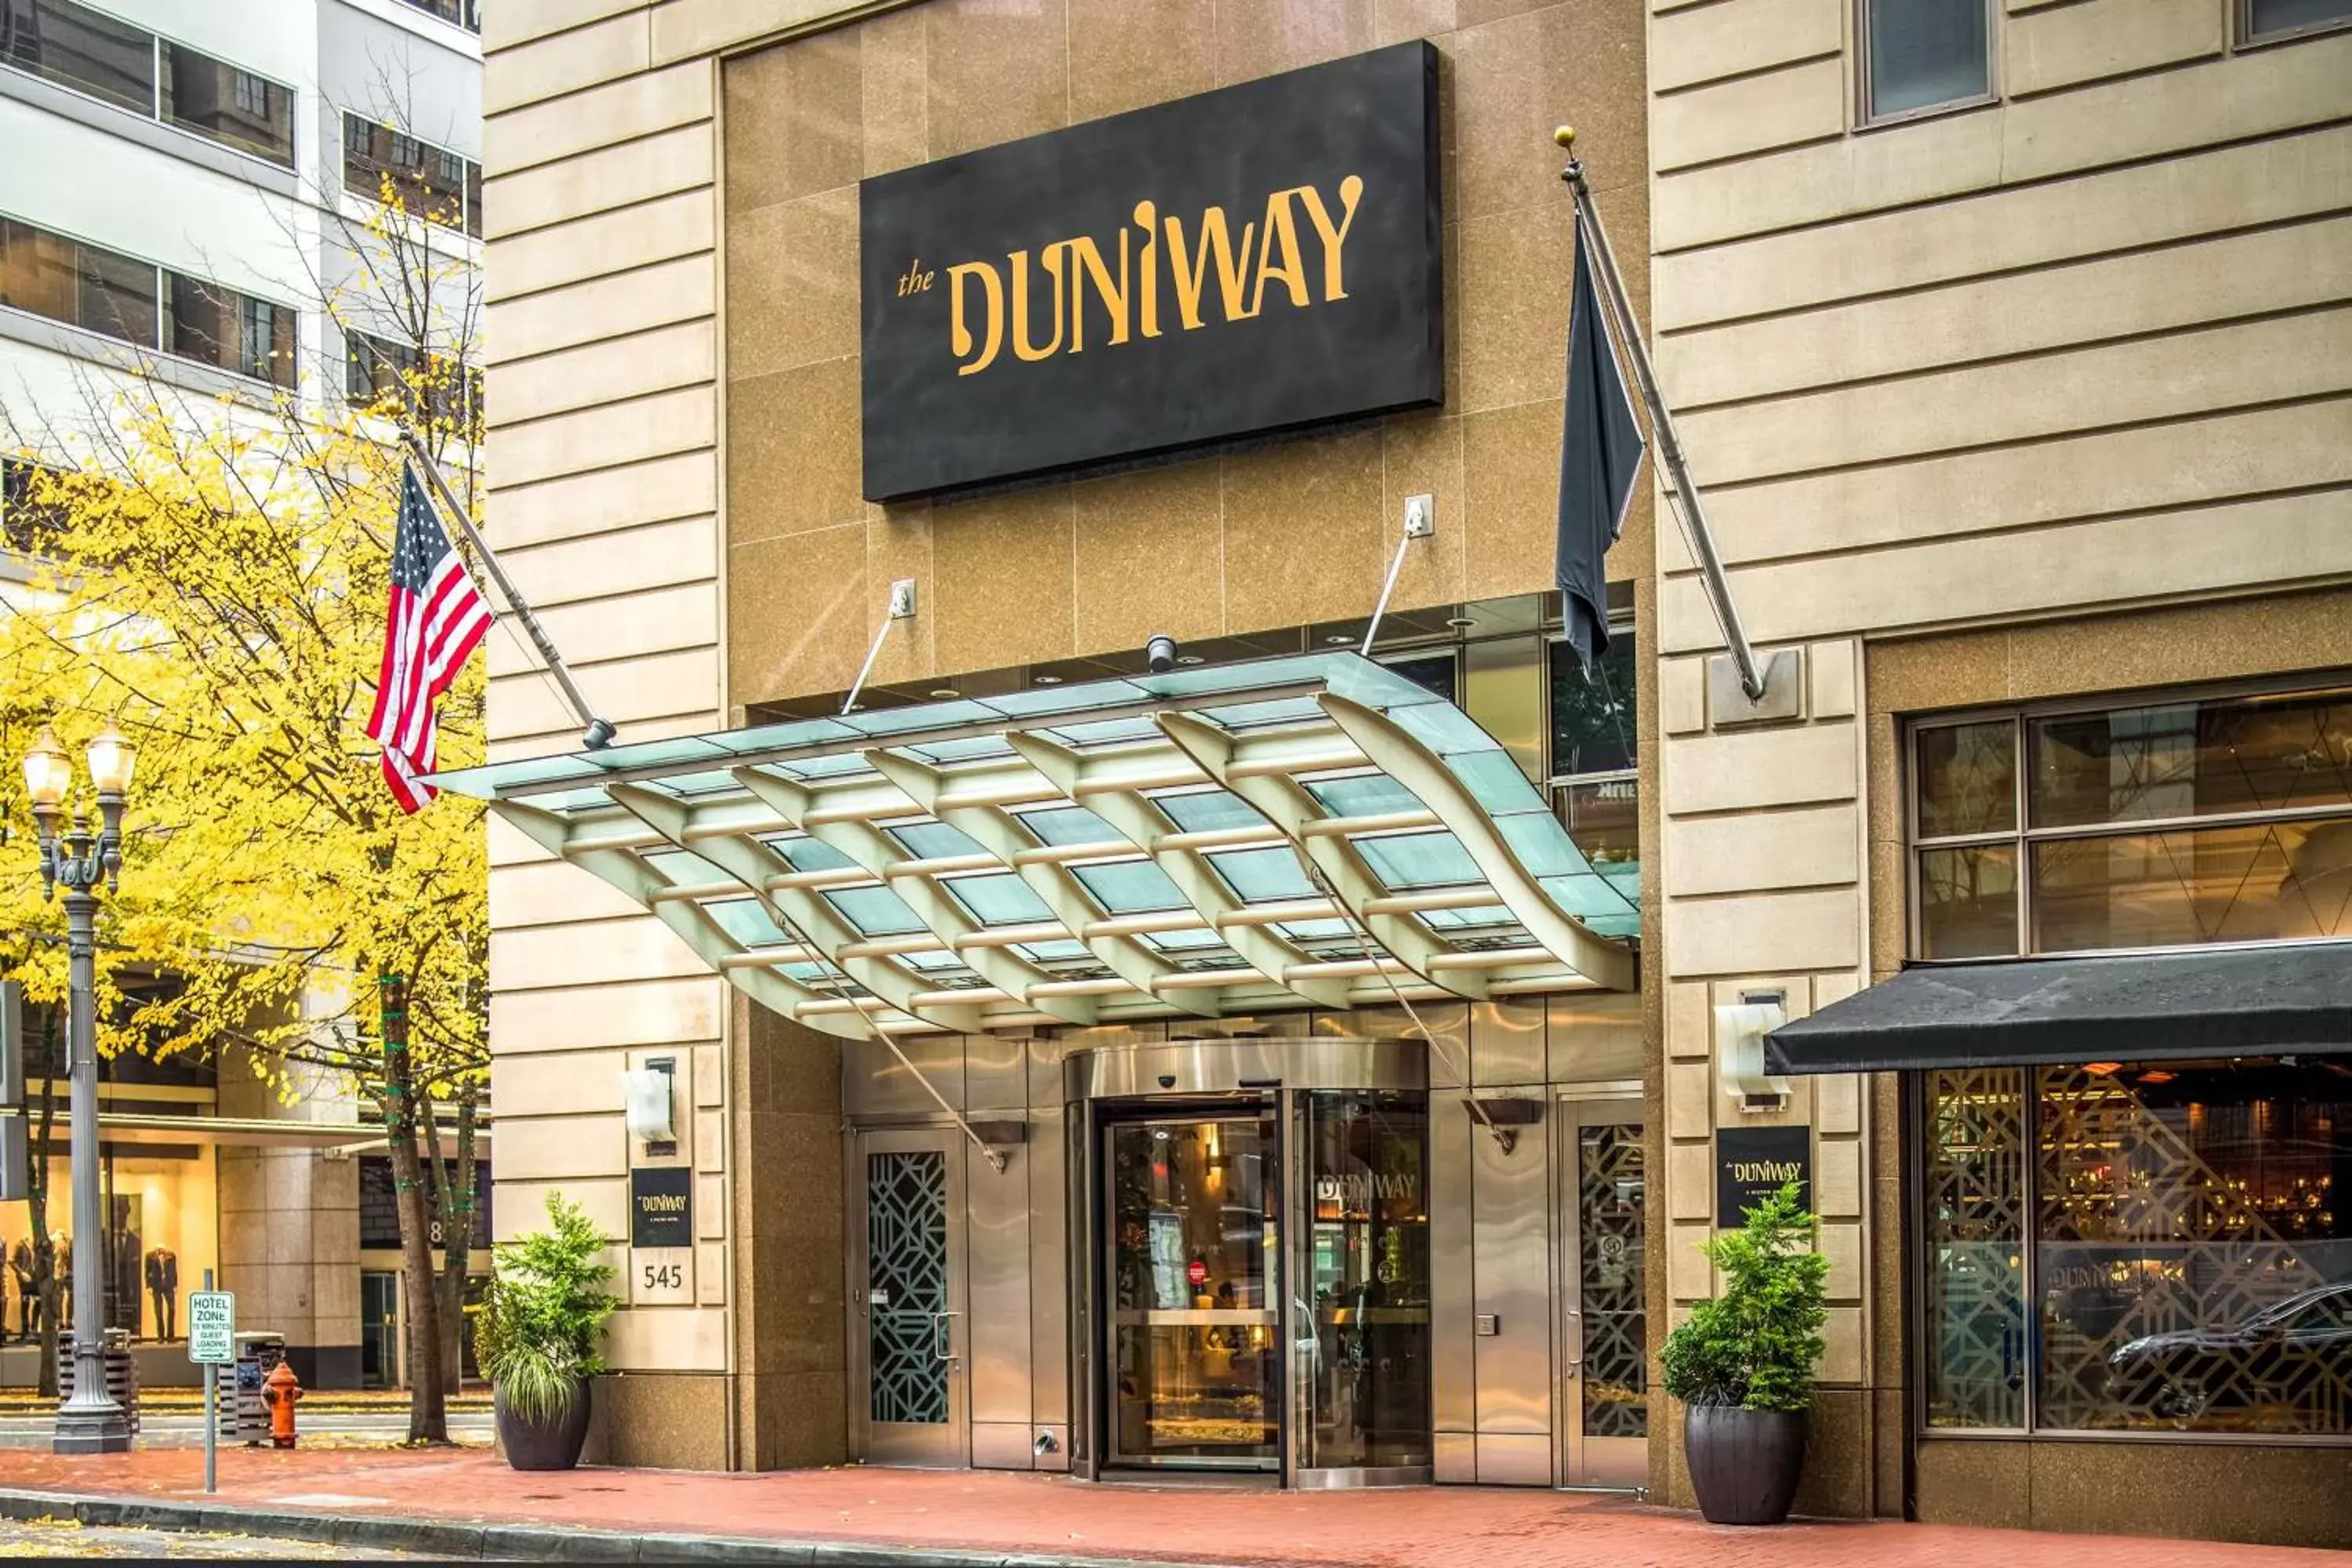 Property Building in The Duniway Portland, A Hilton Hotel